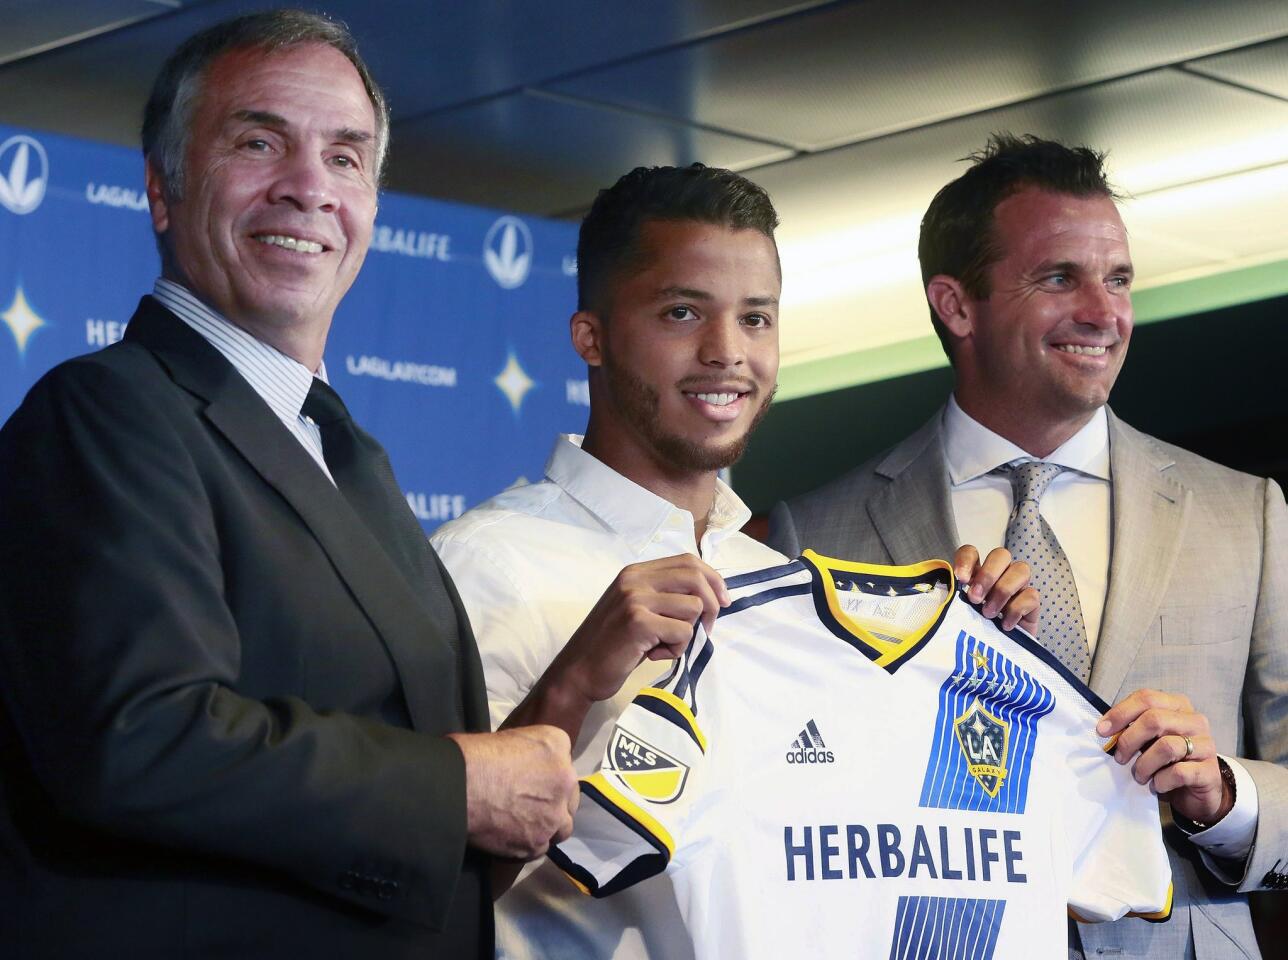 Los Angeles Galaxy coach Bruce Arena, left, and team president Chris Klein, right, pose for a photo with the team's new forward Giovani dos Santosduring an introductory news conference in Carson, Calif., on Tuesday, Aug. 4, 2015. After four years of courting dos Santos, the Galaxy signed the highest-profile Mexican star in their history to a designated player contract, paying a reported $7 million transfer fee. He is expected to make his Major League Soccer debut on Sunday against the Seattle Sounders FC. (AP Photo/Nick Ut)